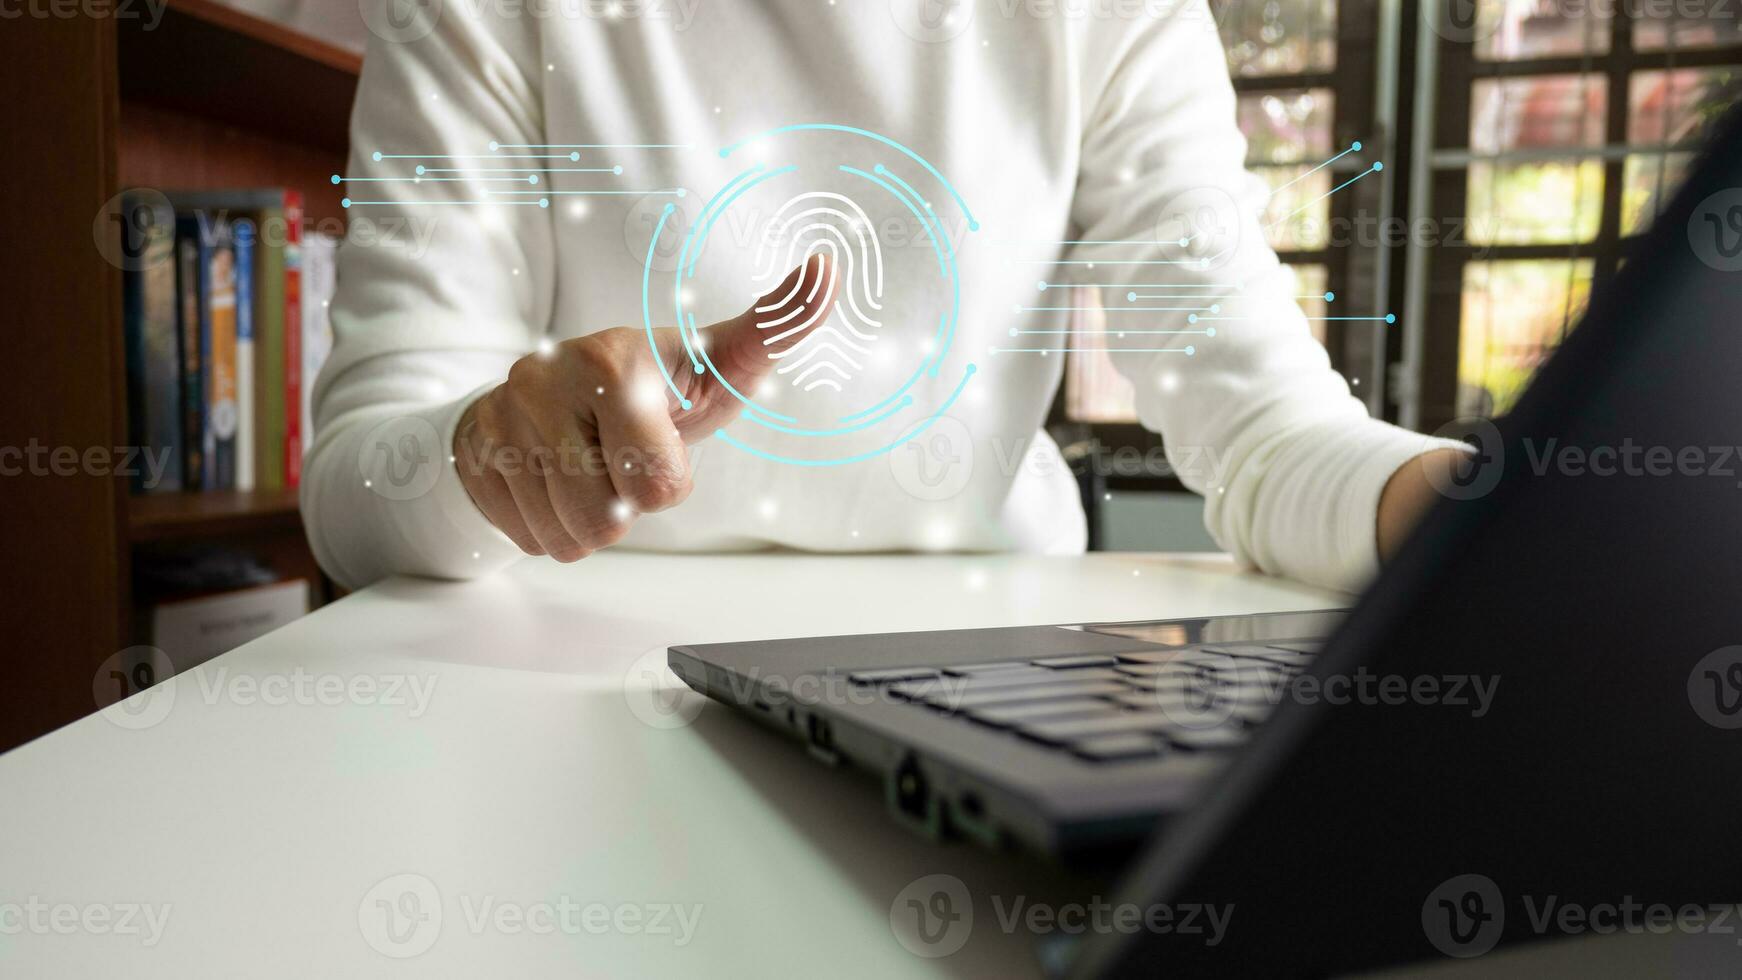 Person touching screen to fingerprint scanner, security access information, big data management concept, Internet of things, cloud computing, internet connection, shopping online and cashless society. photo